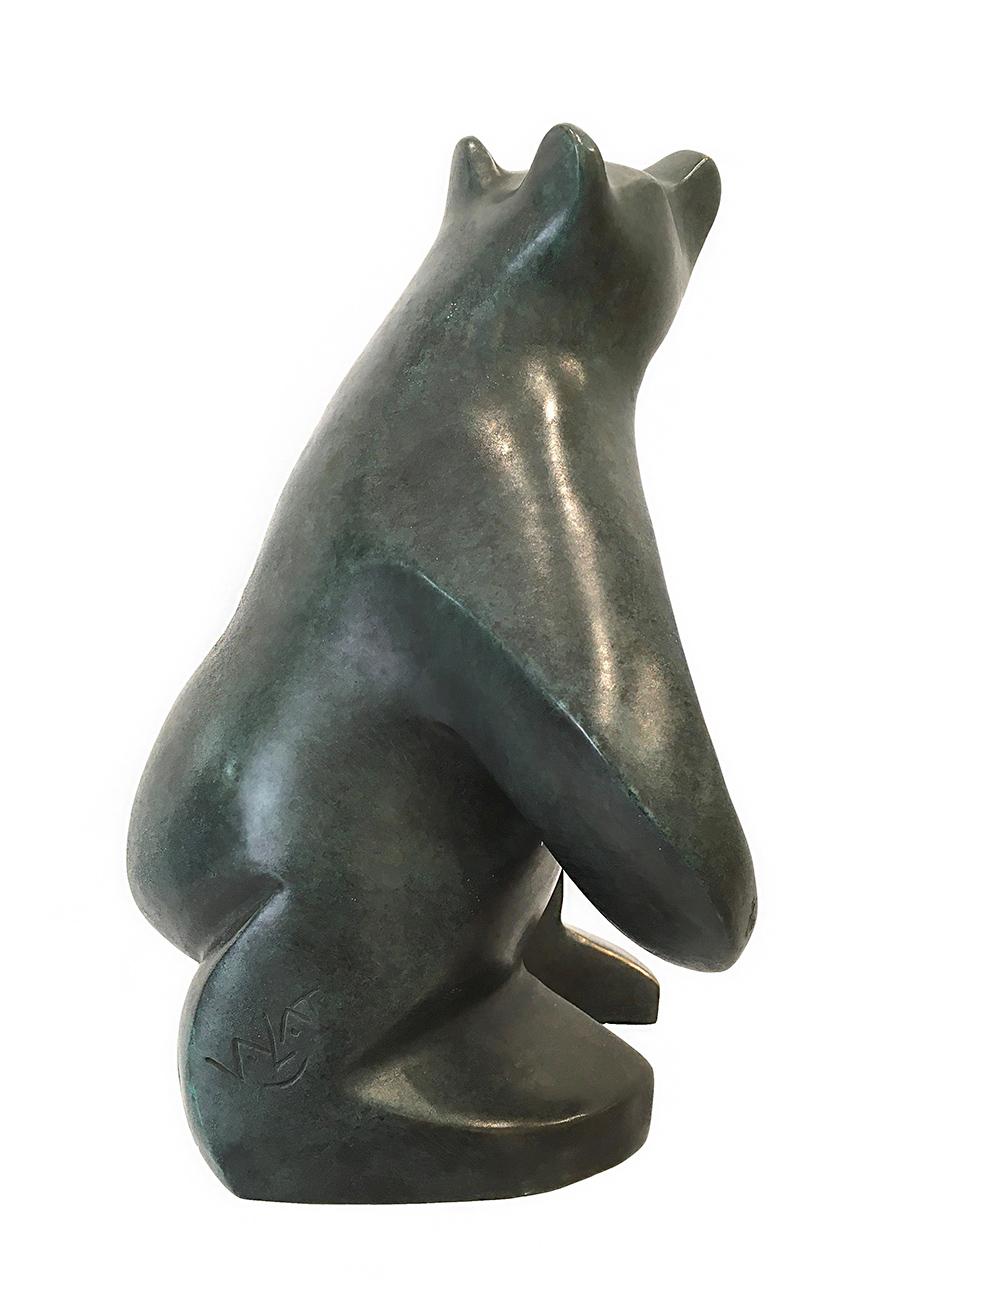 Grounded I by Eric Valat - Bronze sculpture of a bear, animal sculpture 1